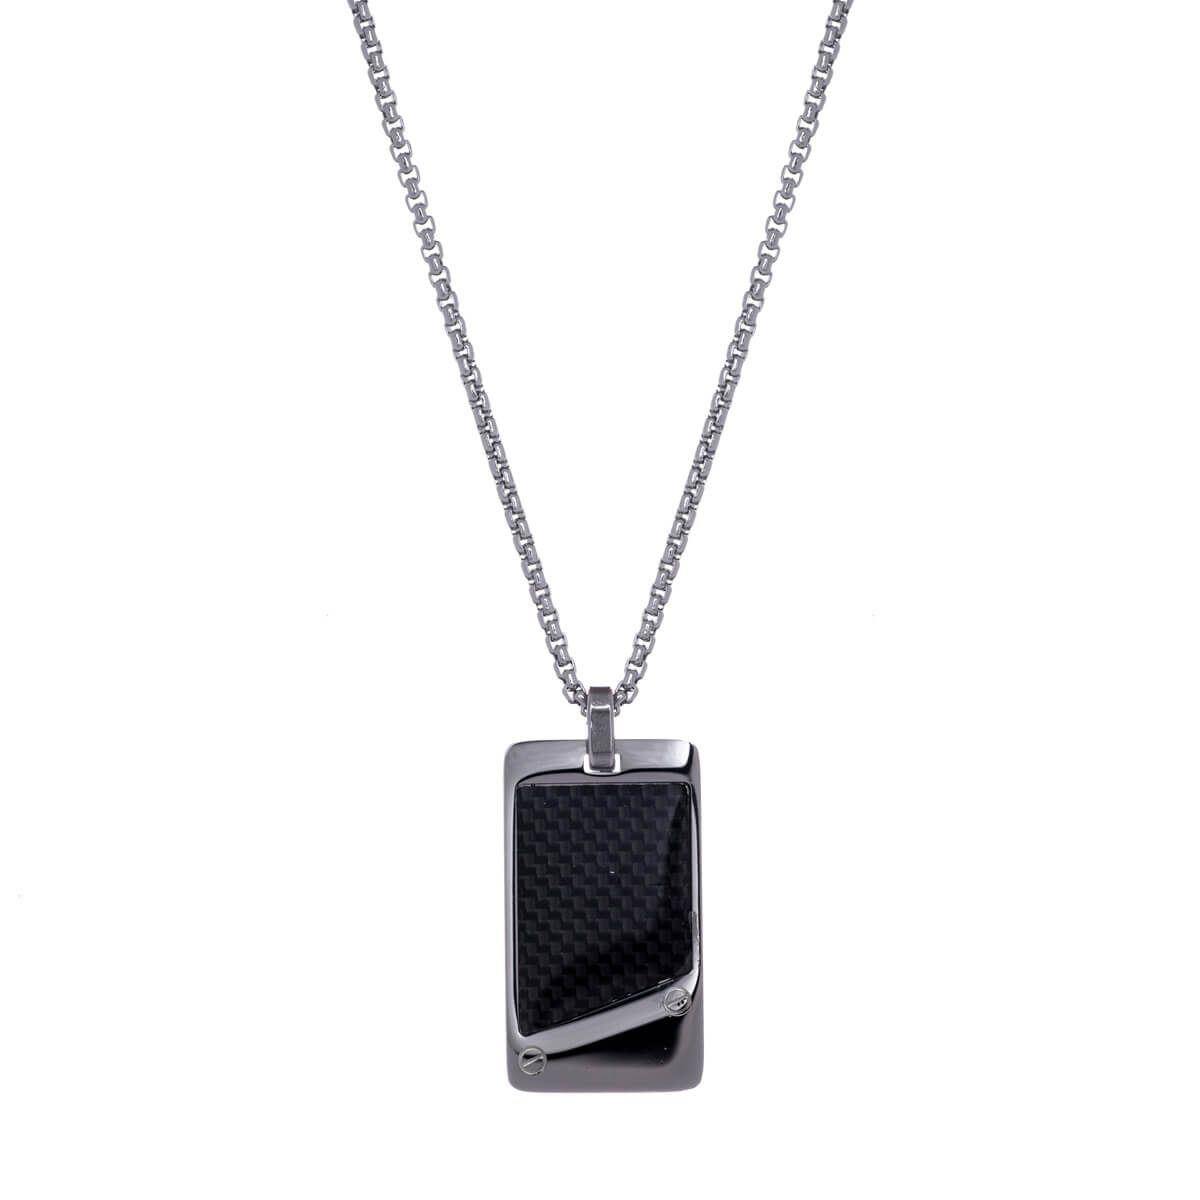 Steel plate necklace with carbon fibre (steel 316L)